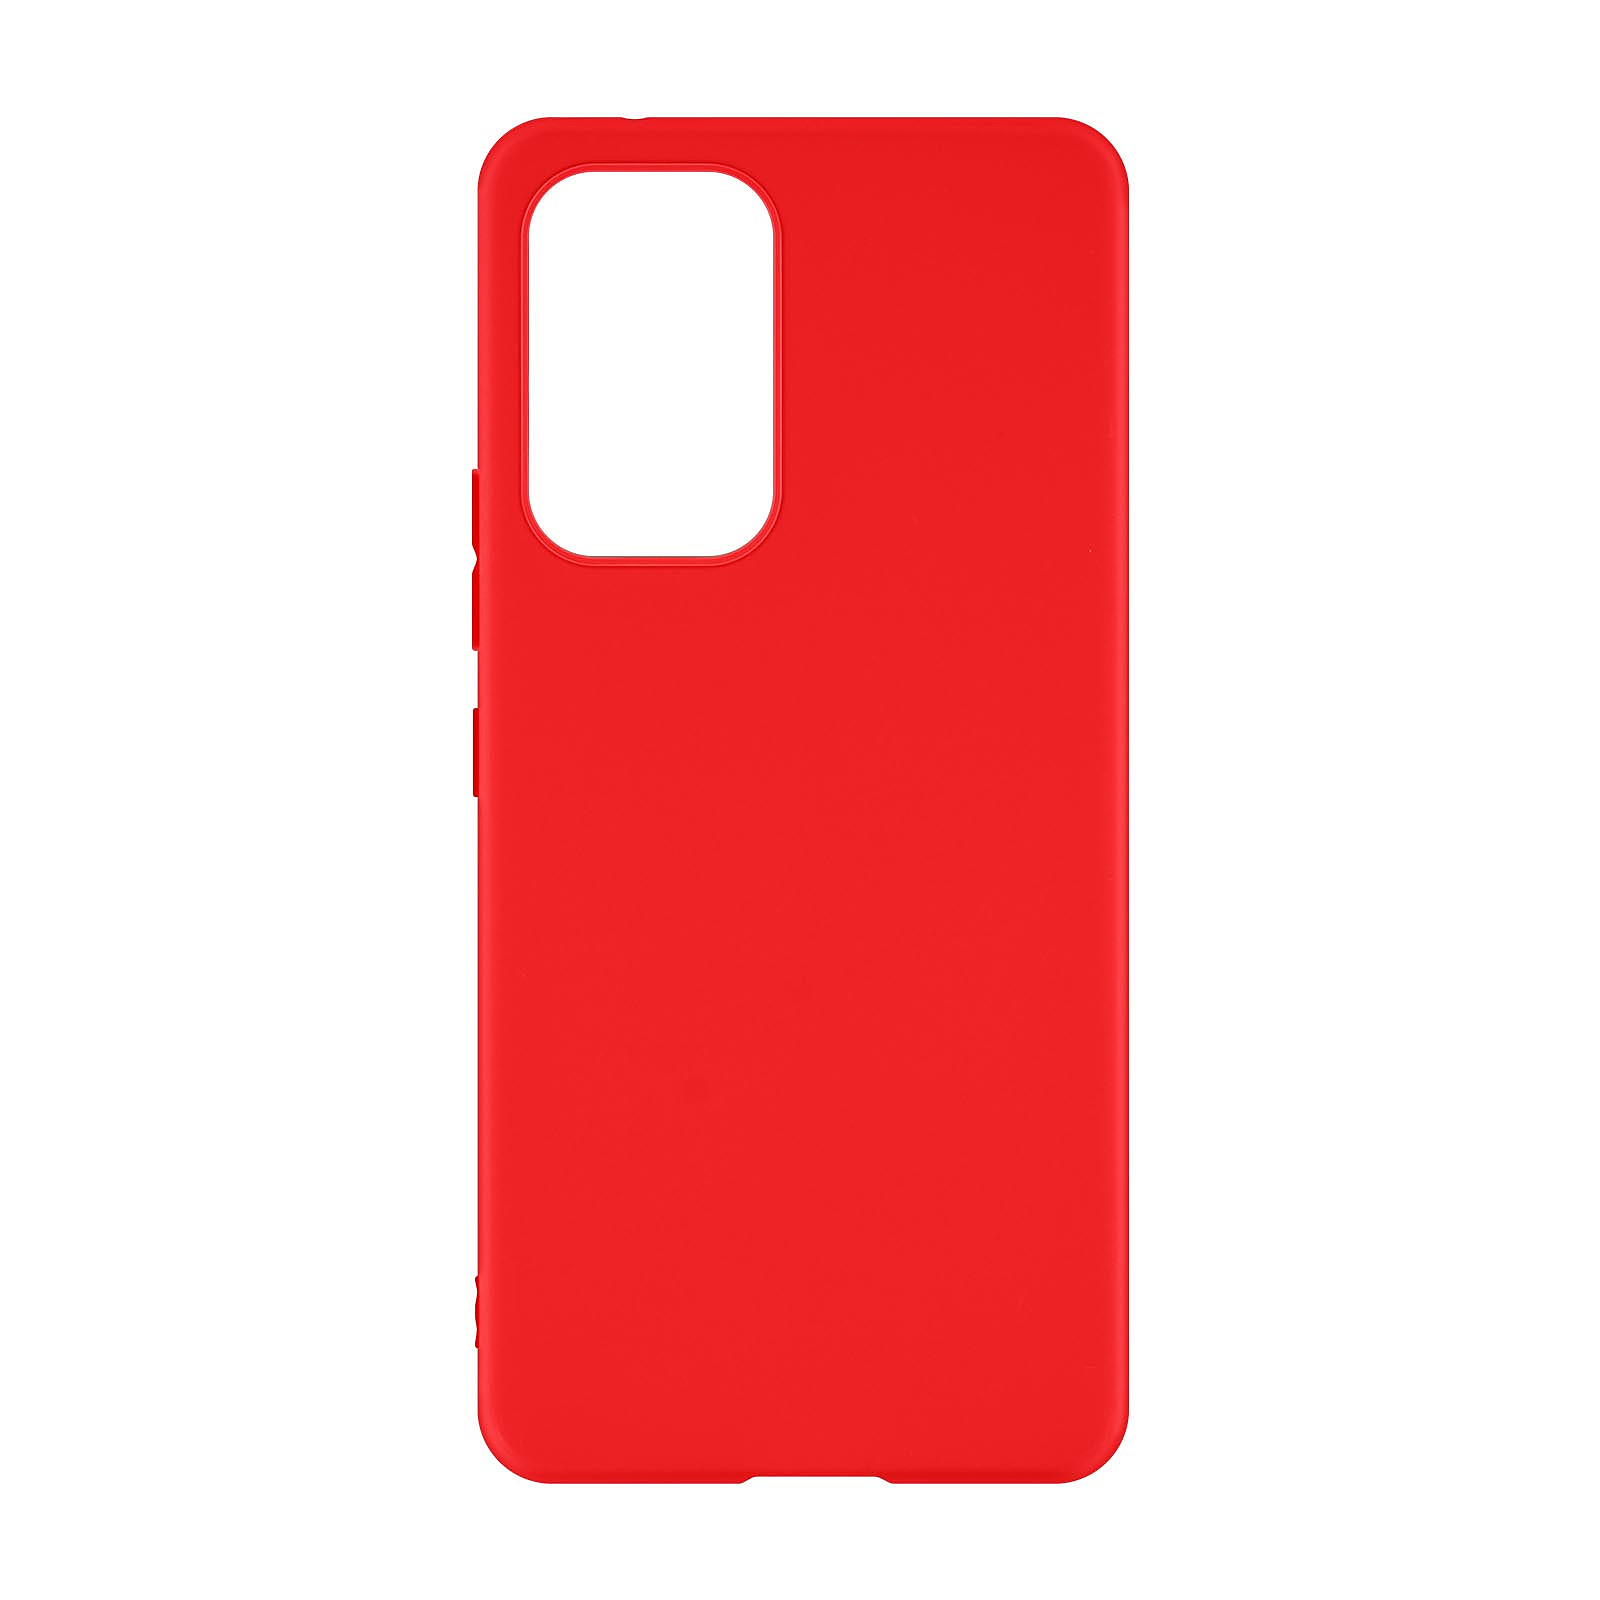 Avizar Coque pour Samsung Galaxy A53 5G Silicone Flexible Finition Soft-touch Anti-traces Rouge - Coque telephone Avizar